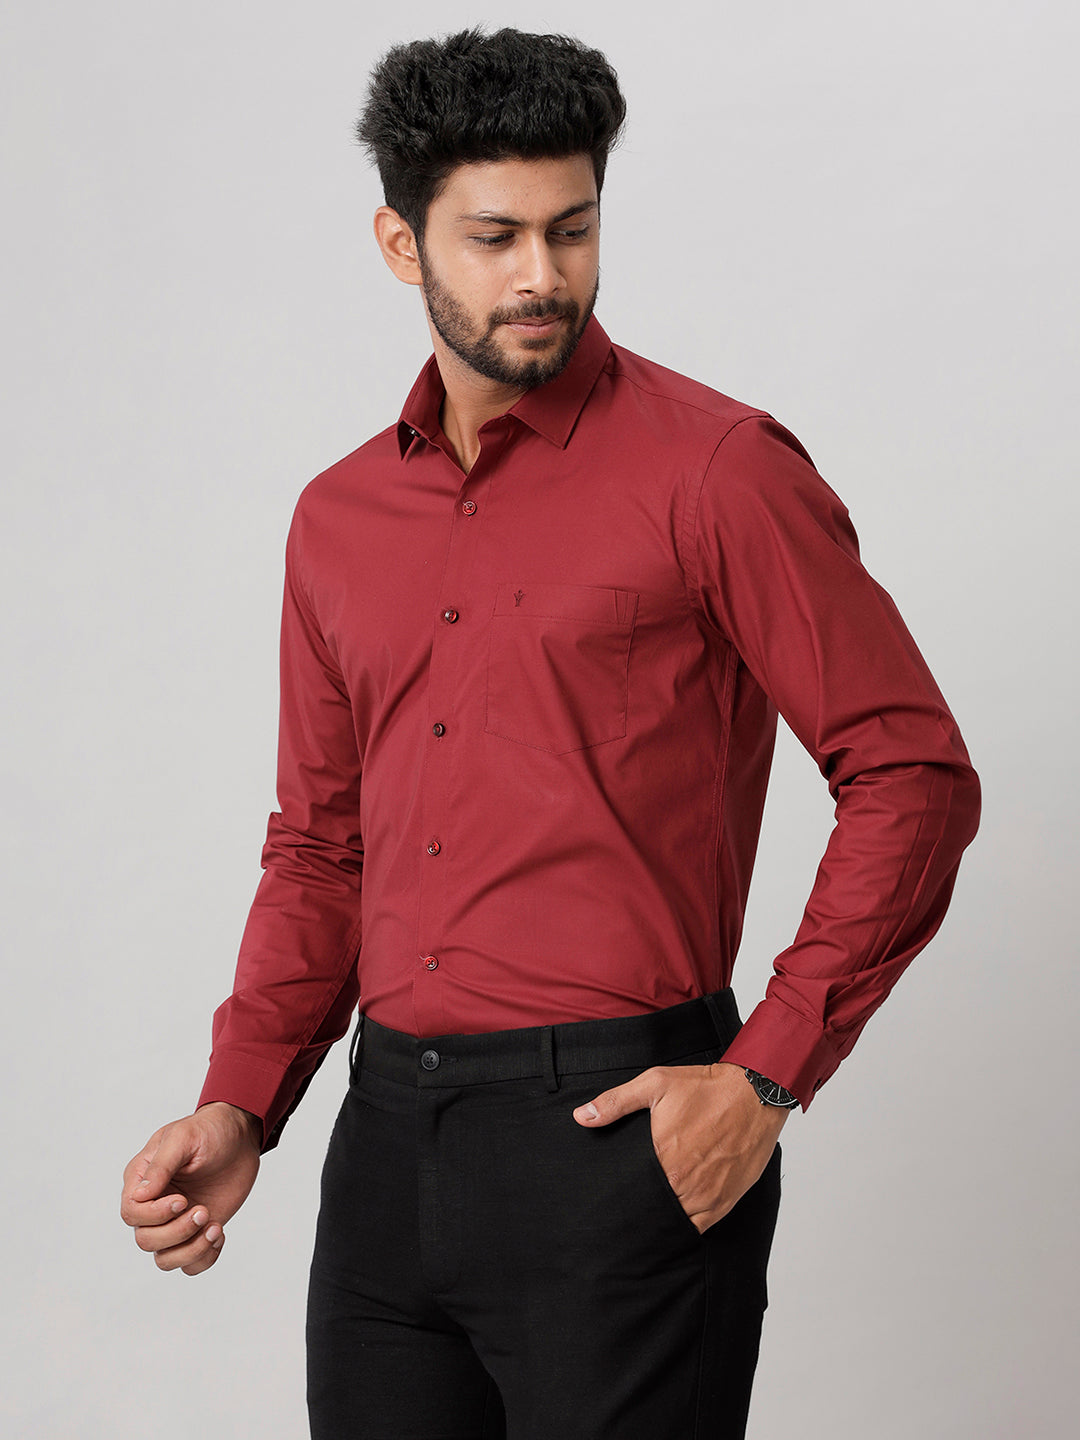 Mens Formal Cotton Spandex 2 Way Stretch Maroon Full Sleeves Shirt LY6-Side view